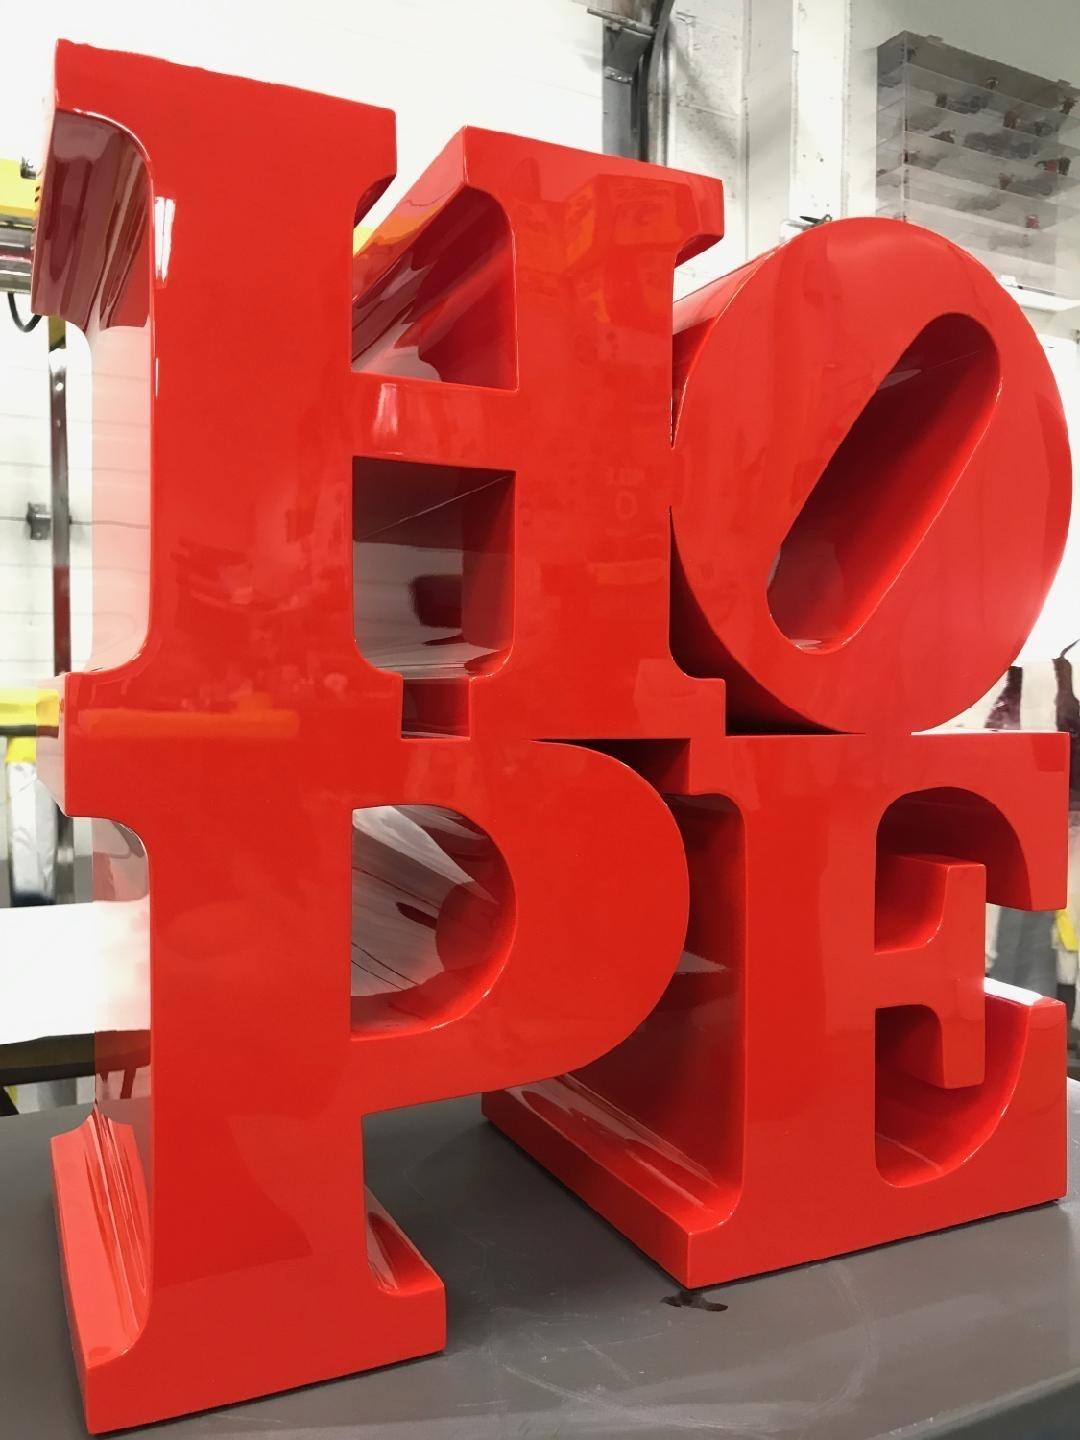 HOPE (Flame Red) - Sculpture by Robert Indiana